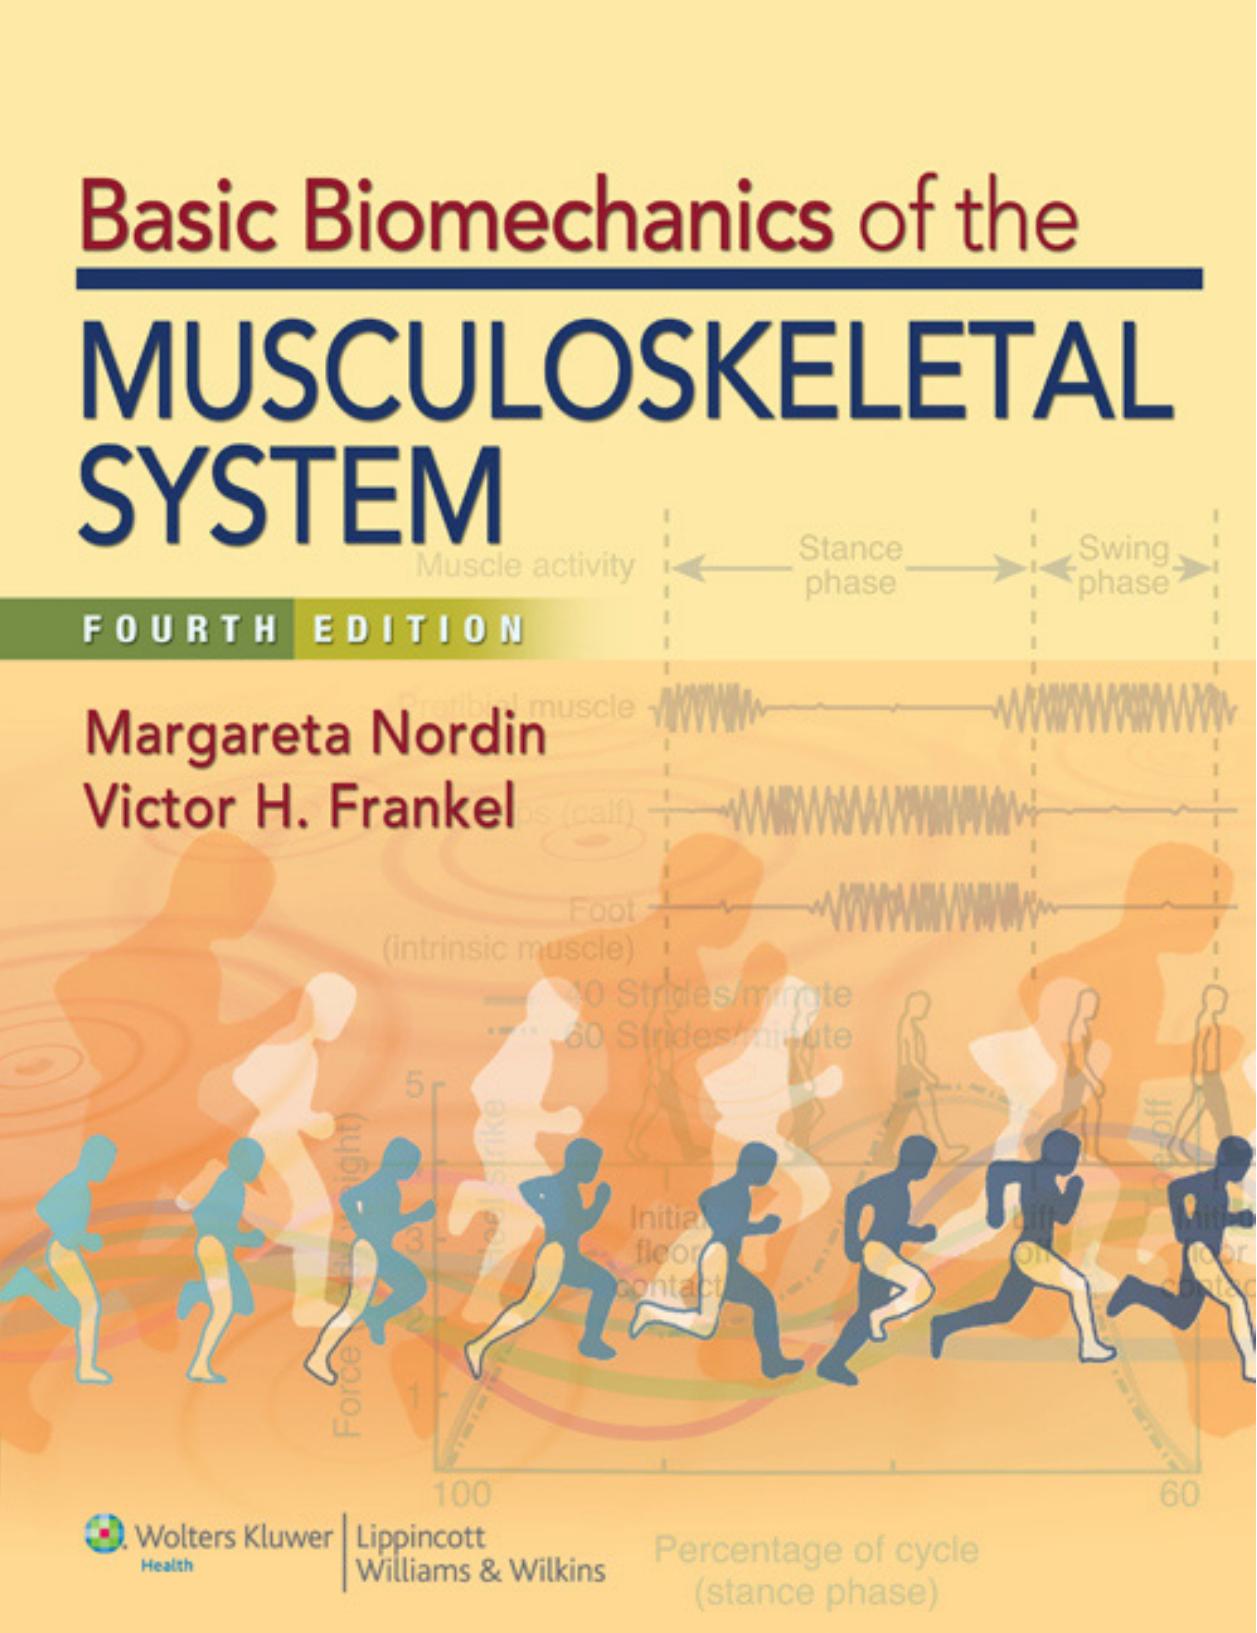 Basic Biomechanics of the MUSCULOSKELETAL SYSTEM, FOURTH EDITION